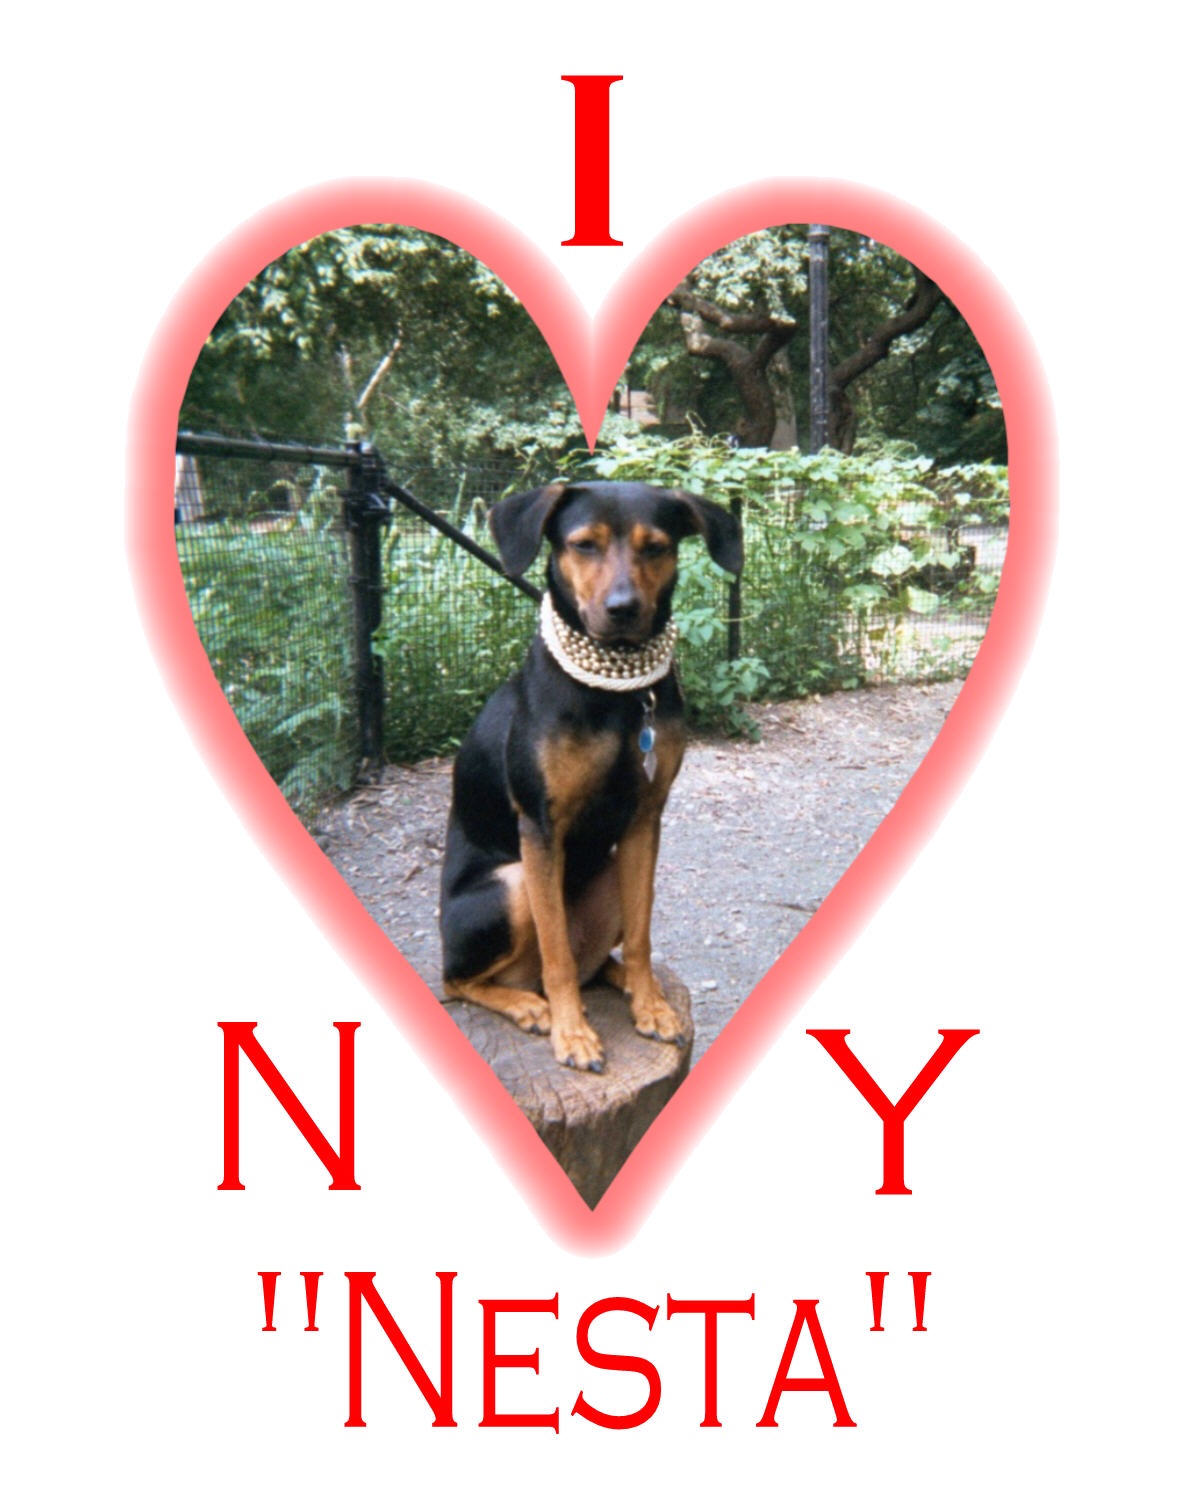 Nesta Hopes You Have A Great Year...We Plan Too!